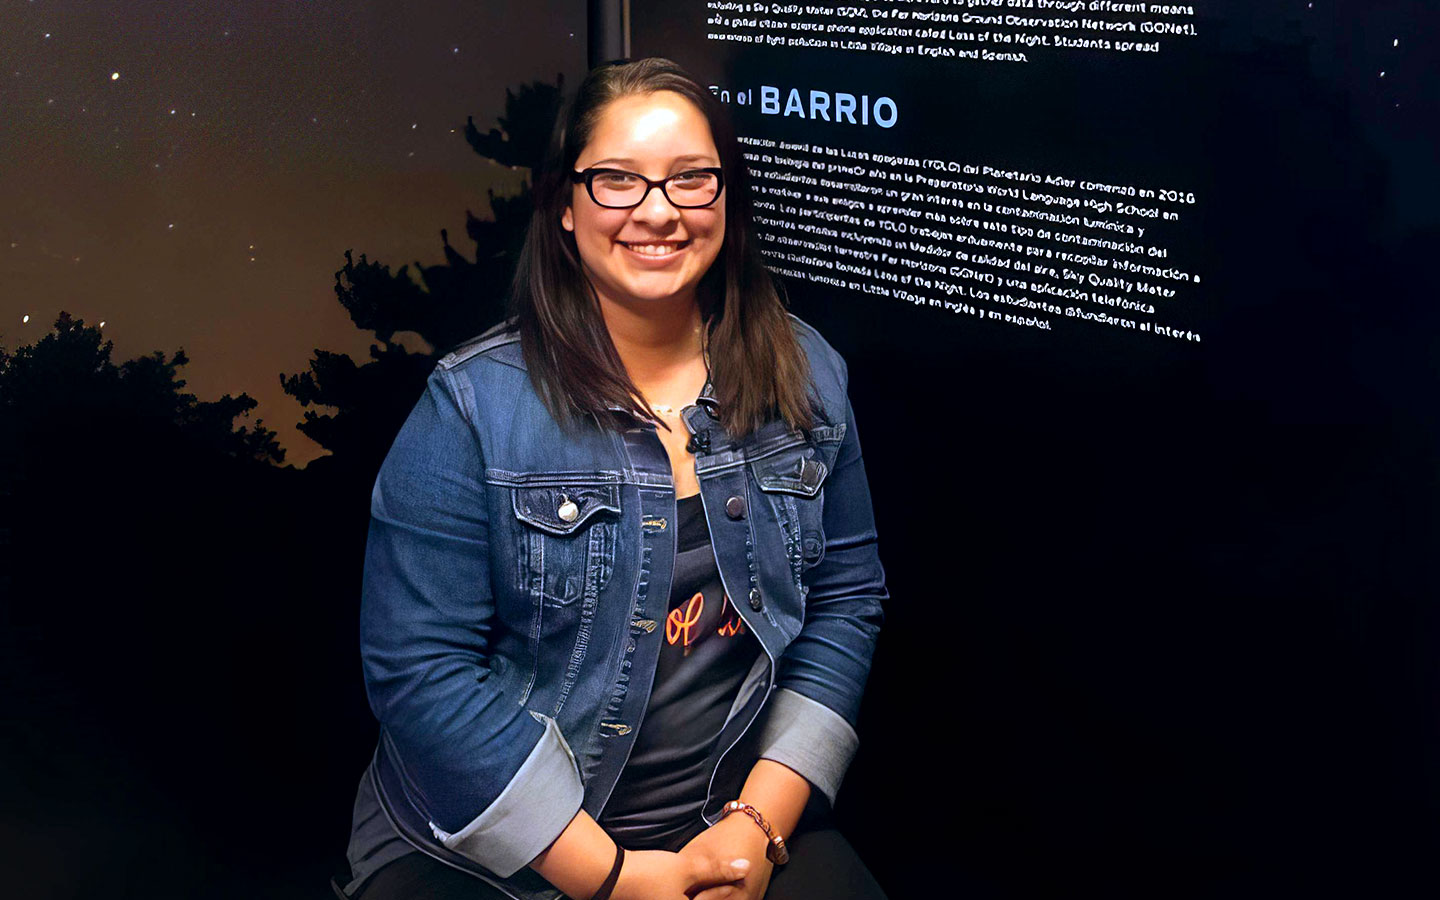 DarkSky Advocate Rosalía Lugo opens teens’ eyes to light pollution in Chicago